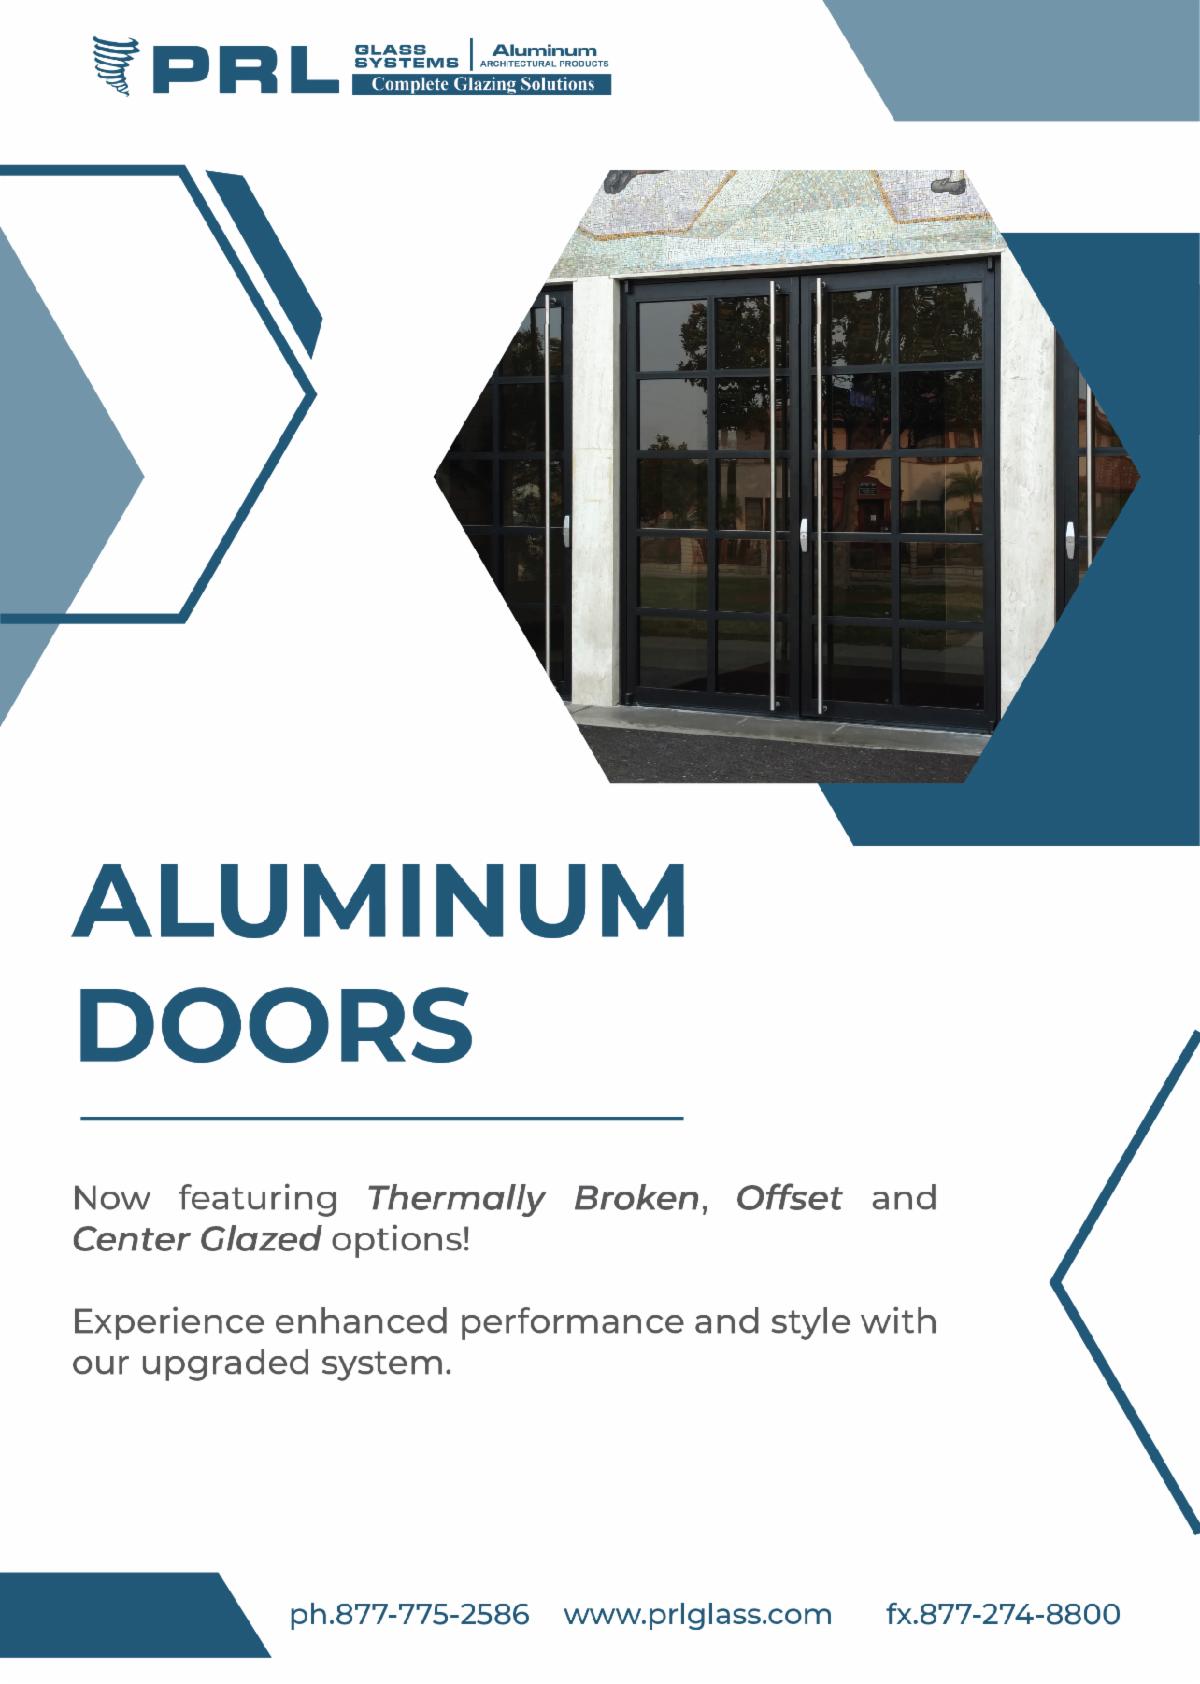 Thermally Broken Aluminum Entry Doors Available at PRL